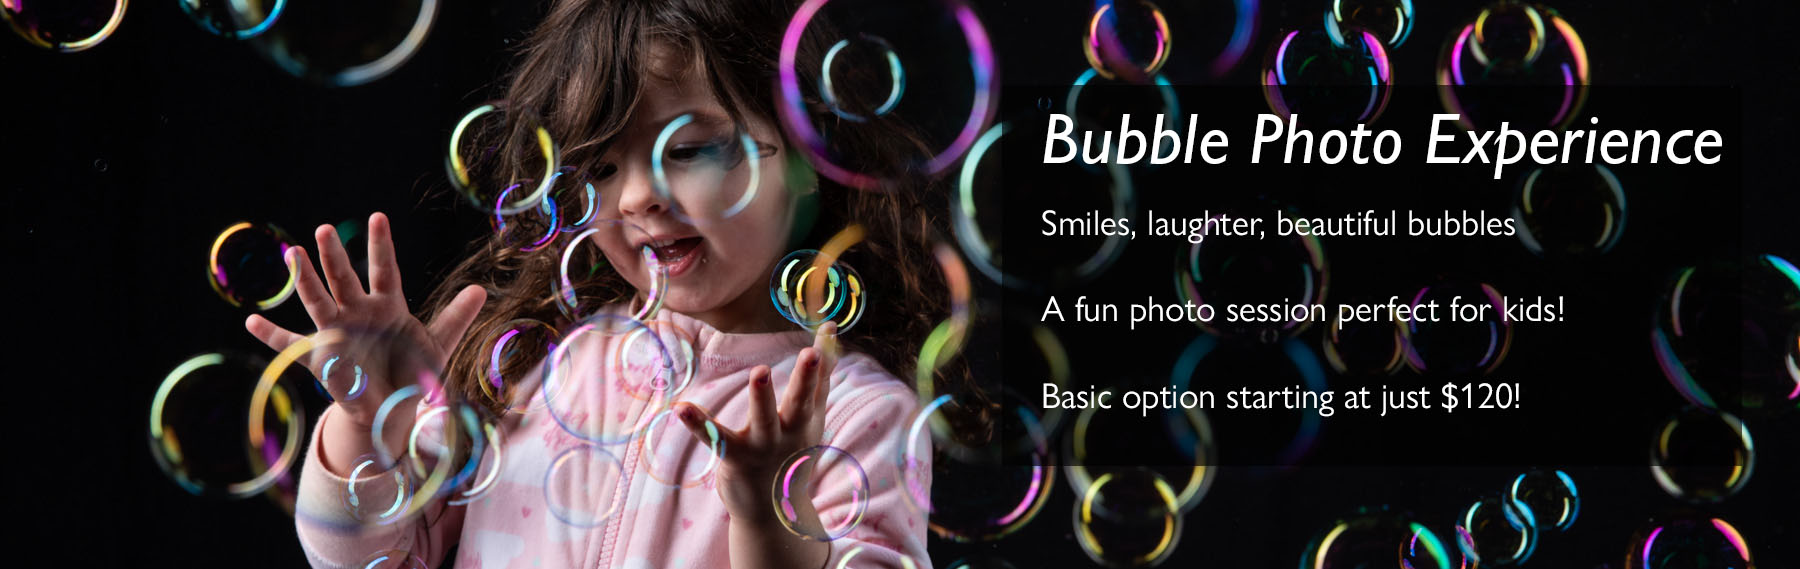 girl in the middle of bubbles